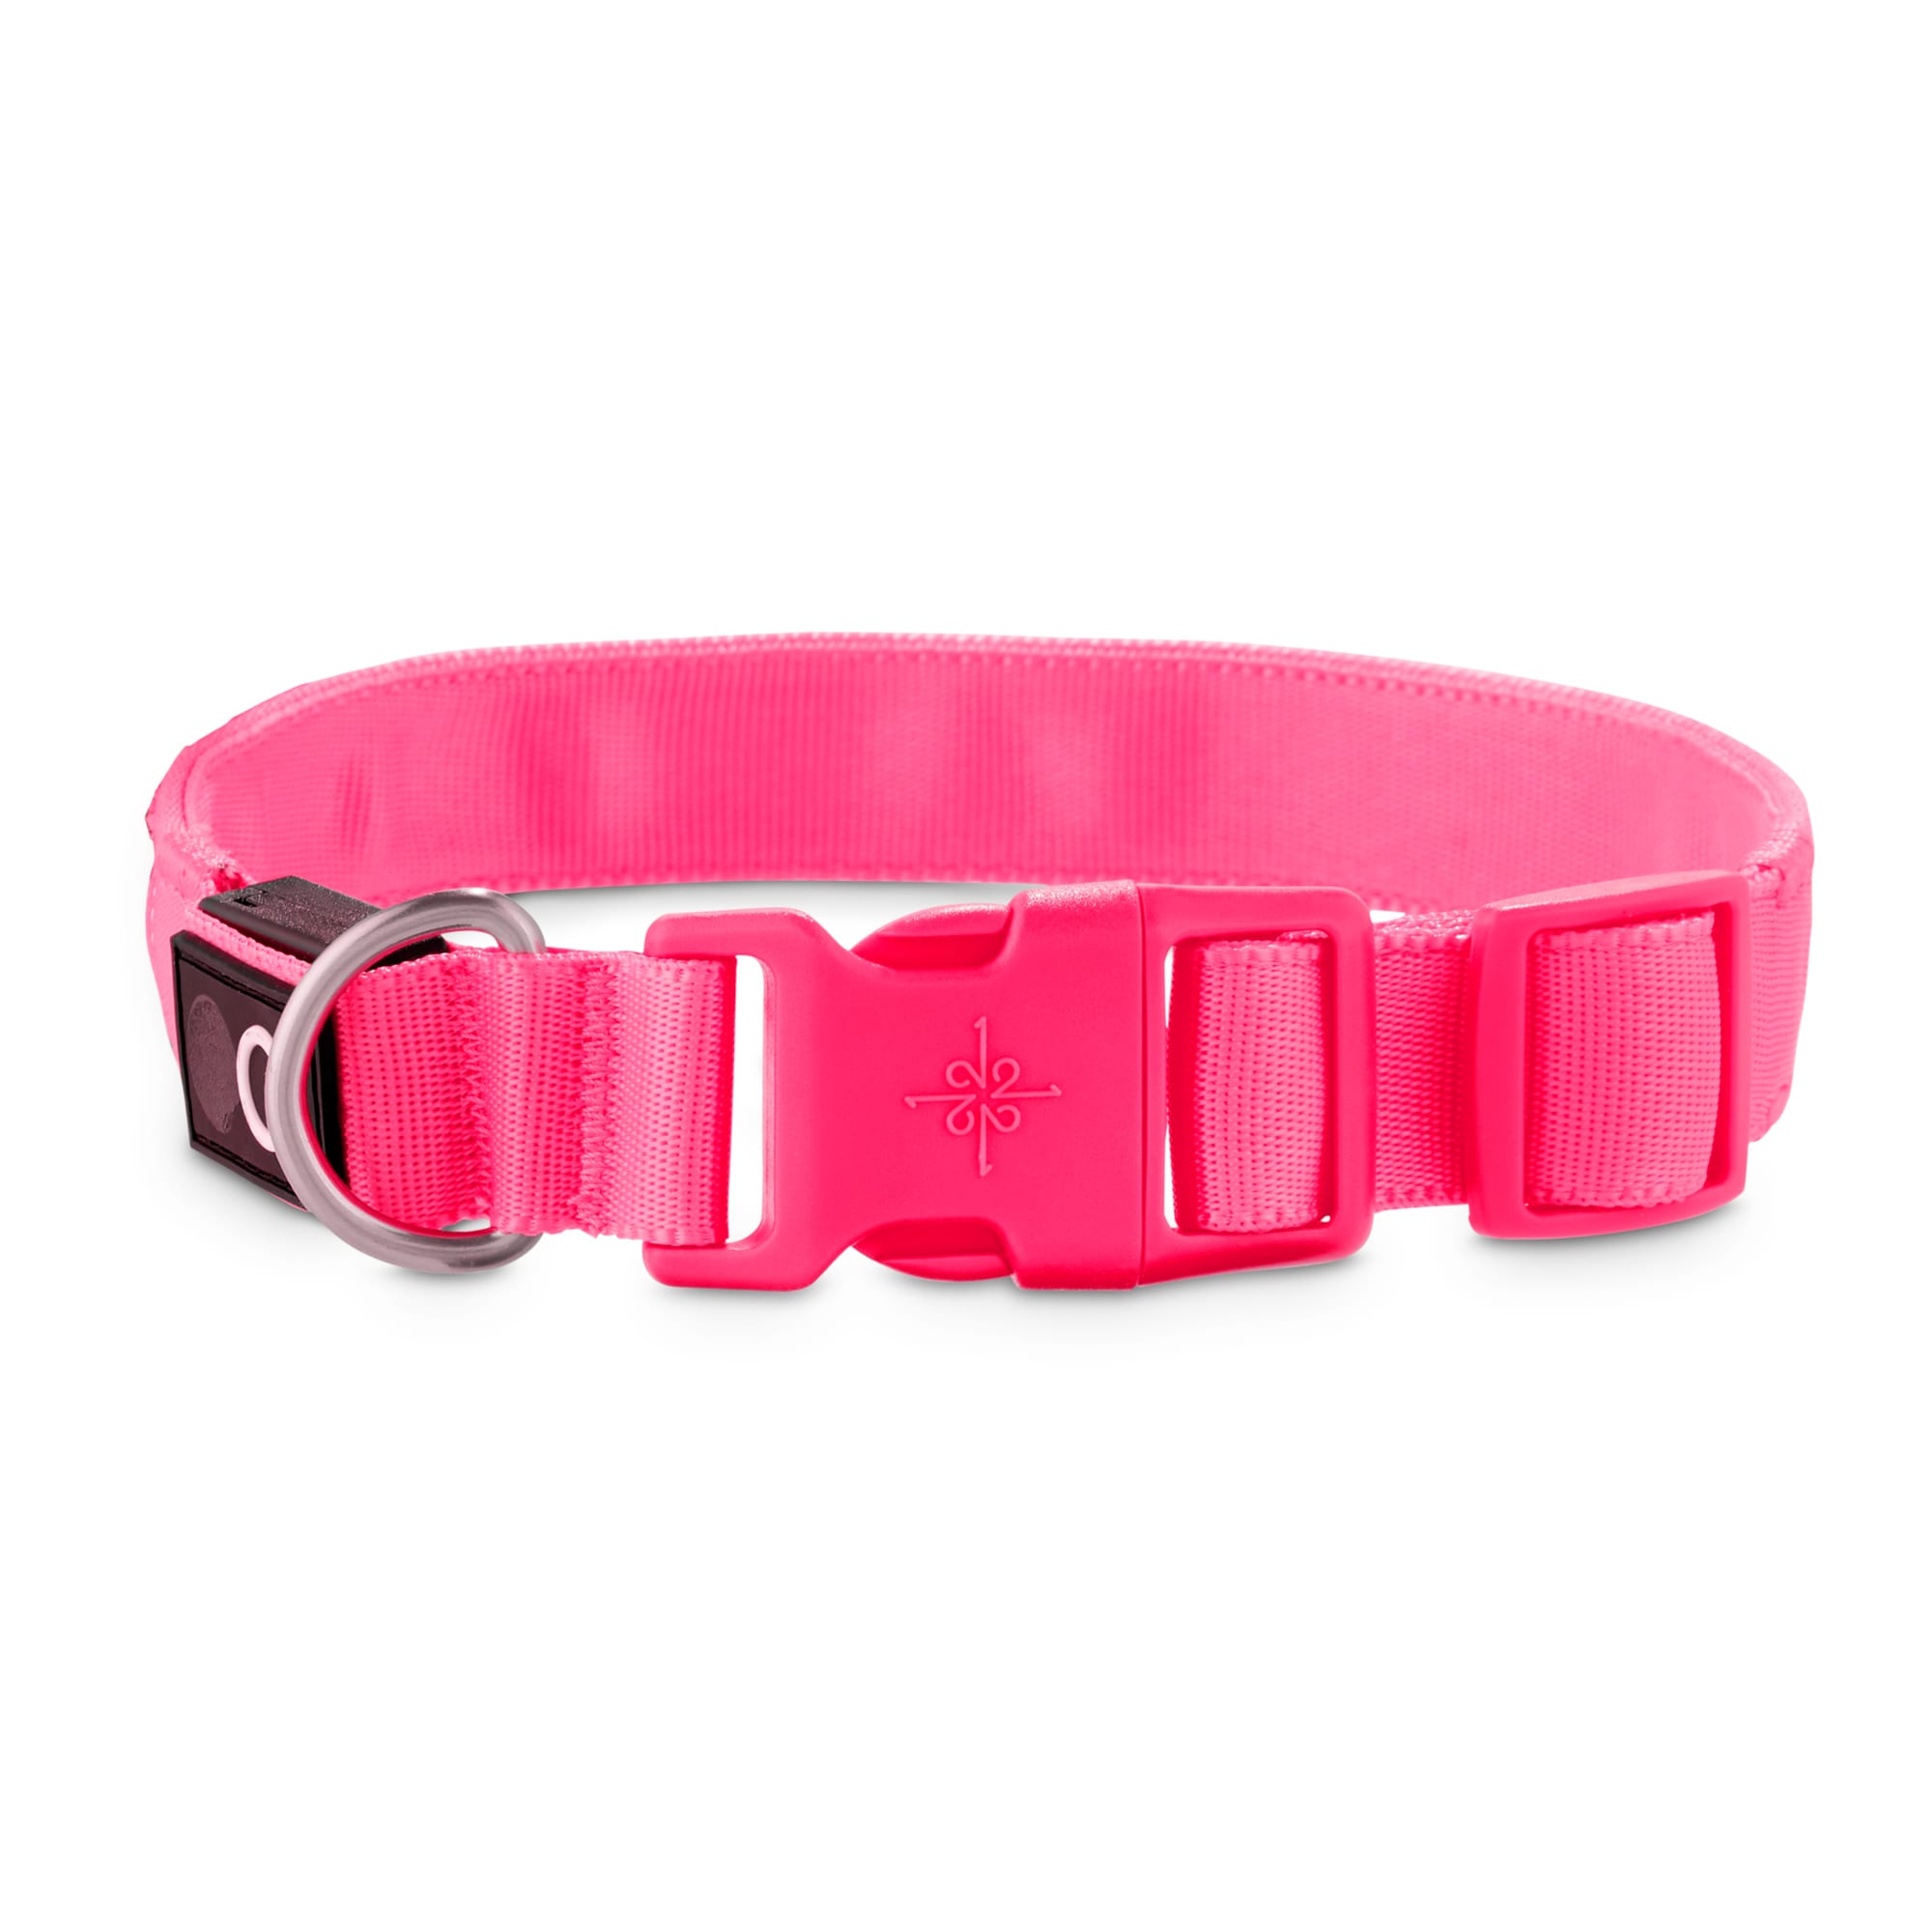 LED LIGHT UP ROLLING BUY DOG NYLON COLLARS WITH MULTIPLE MODES PINK/BLUE 